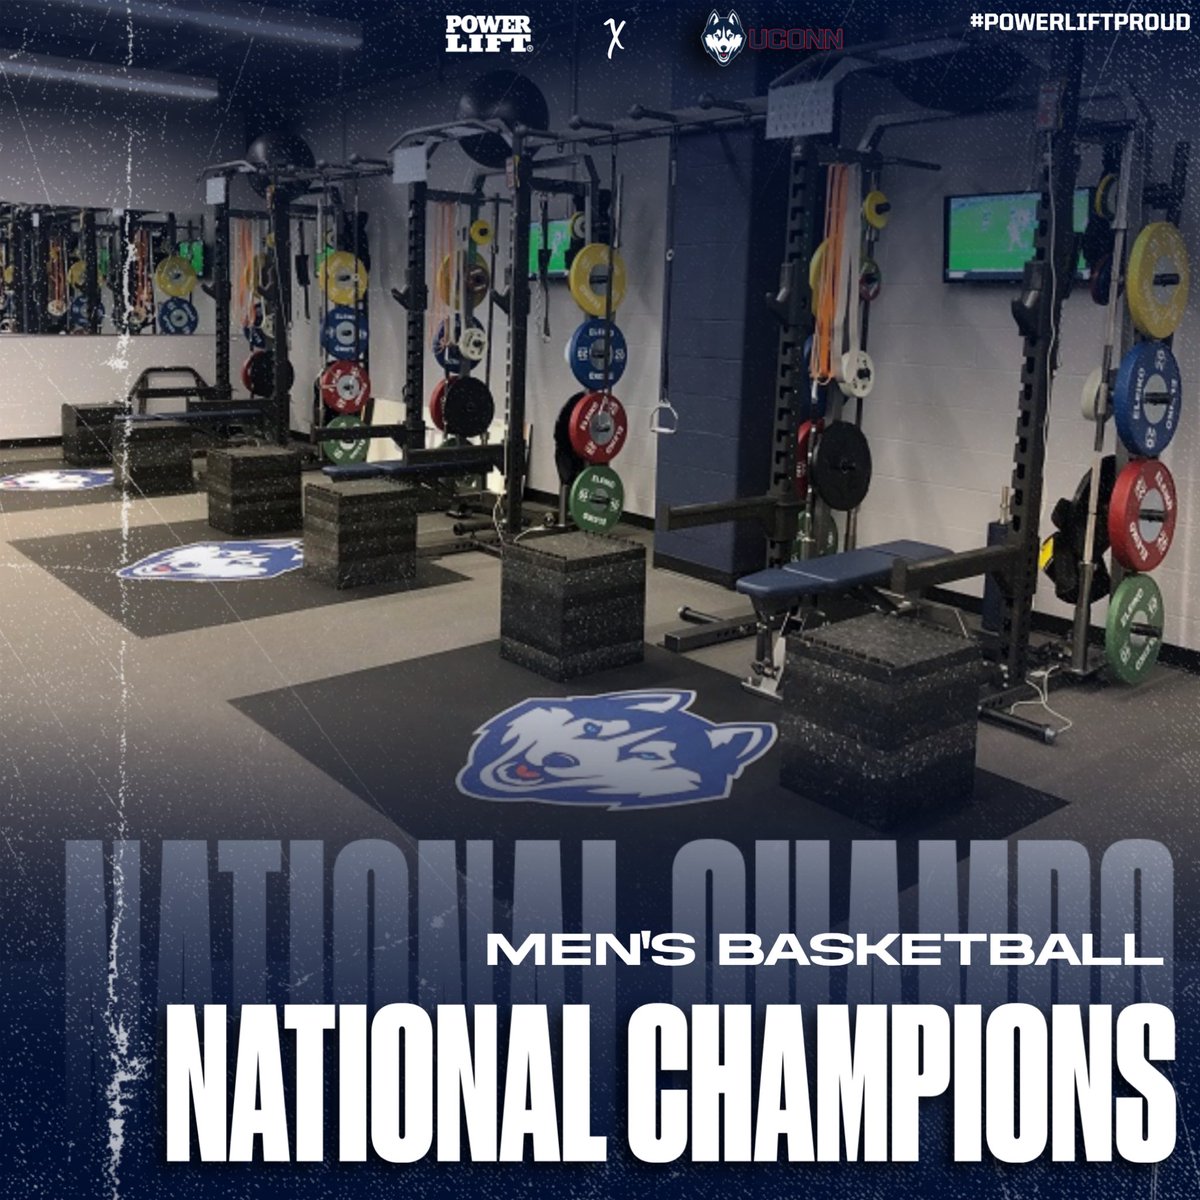 𝐍𝐀𝐓𝐈𝐎𝐍𝐀𝐋 𝐂𝐇𝐀𝐌𝐏𝐈𝐎𝐍𝐒🏆 We are proud to back both of these teams with Power Lift equipment 🤝 @GamecockWBB | @UConnMBB #PowerLiftProud #PowerLiftBuilt #ChampionProducts #ChampionResults